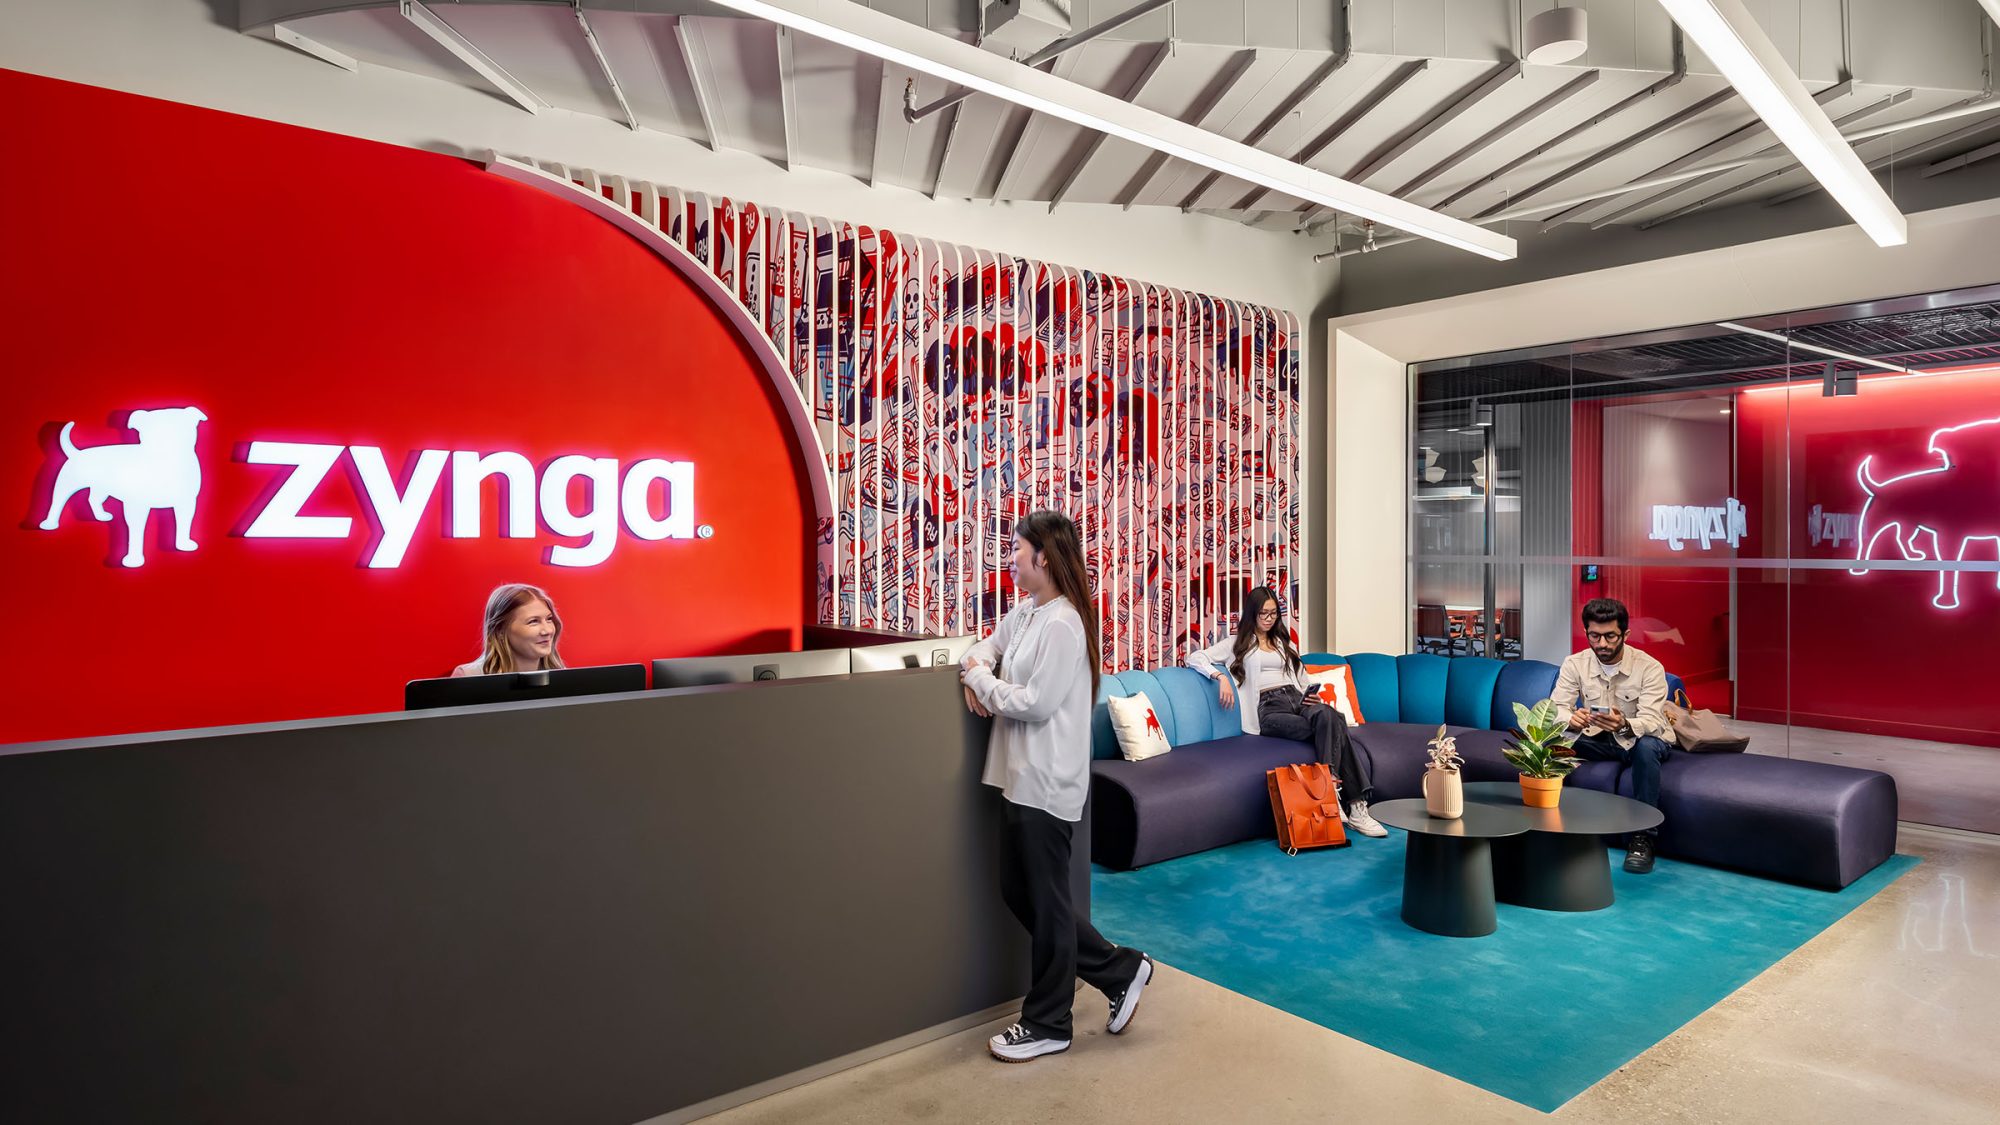 M Moser’s office design for Zynga leads with an inviting, fully branded reception area, including comfortable seating for guests and employees.